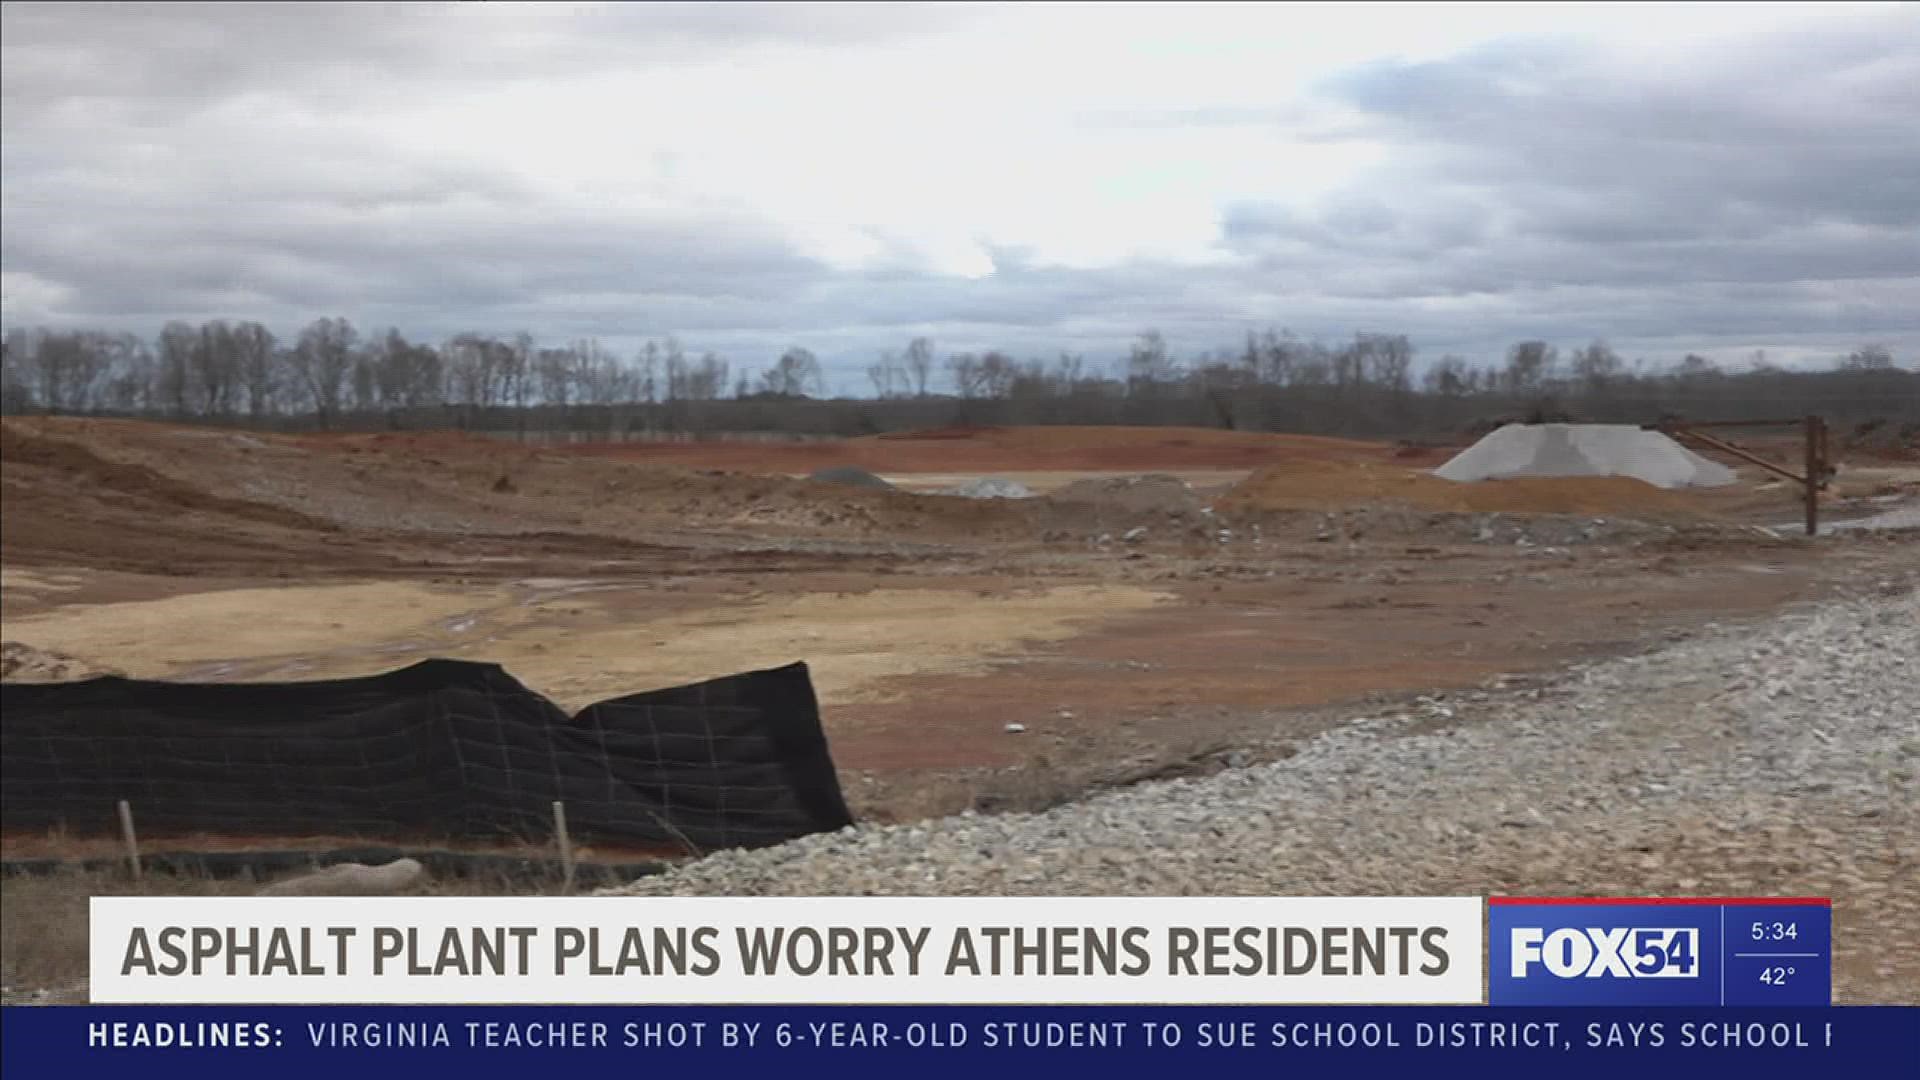 Some Athens residents are concerned about an asphalt plant being built in their neighborhood. Public comment period ends Jan. 27, 2023